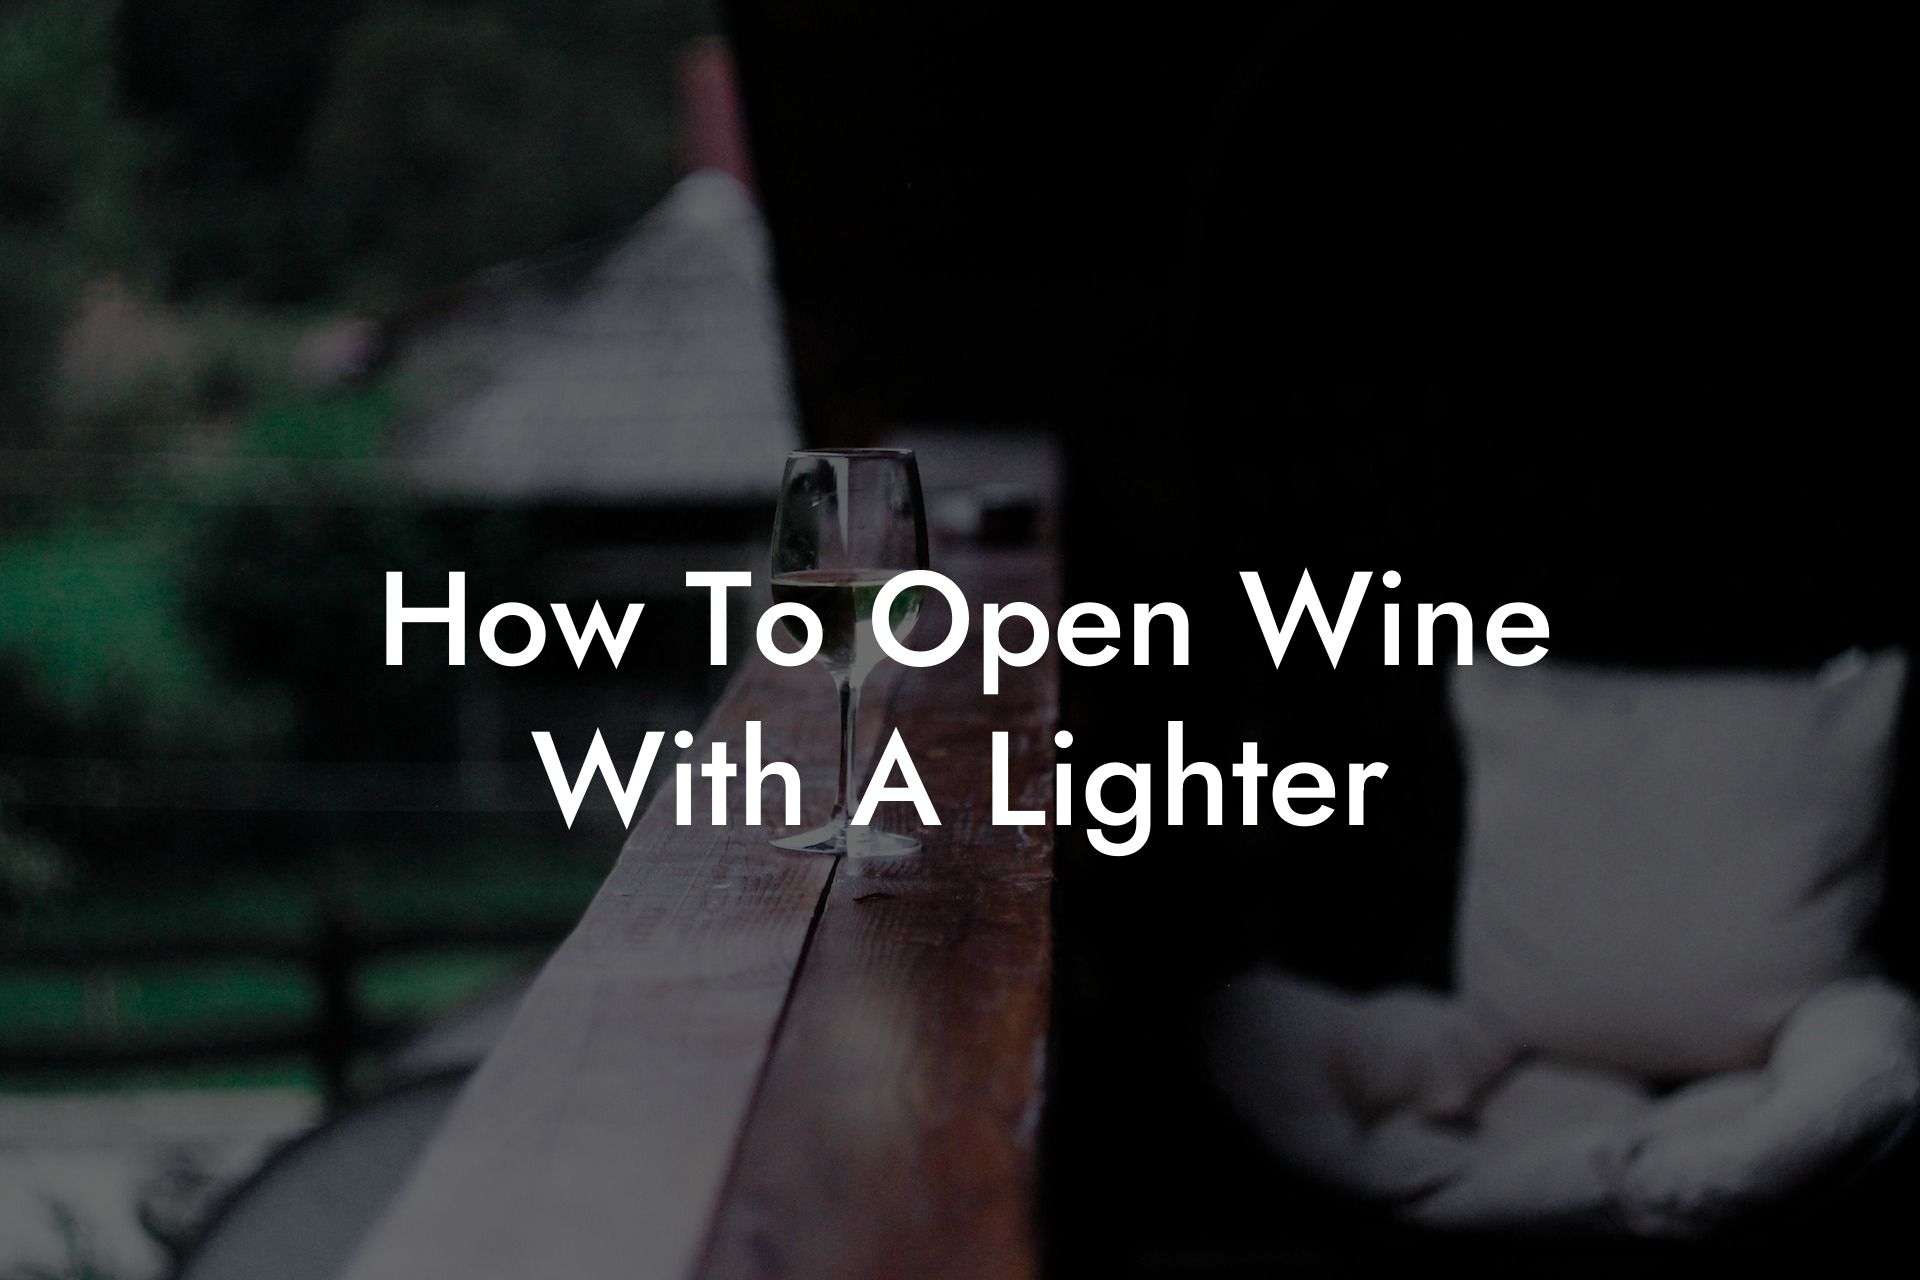 How To Open Wine With A Lighter